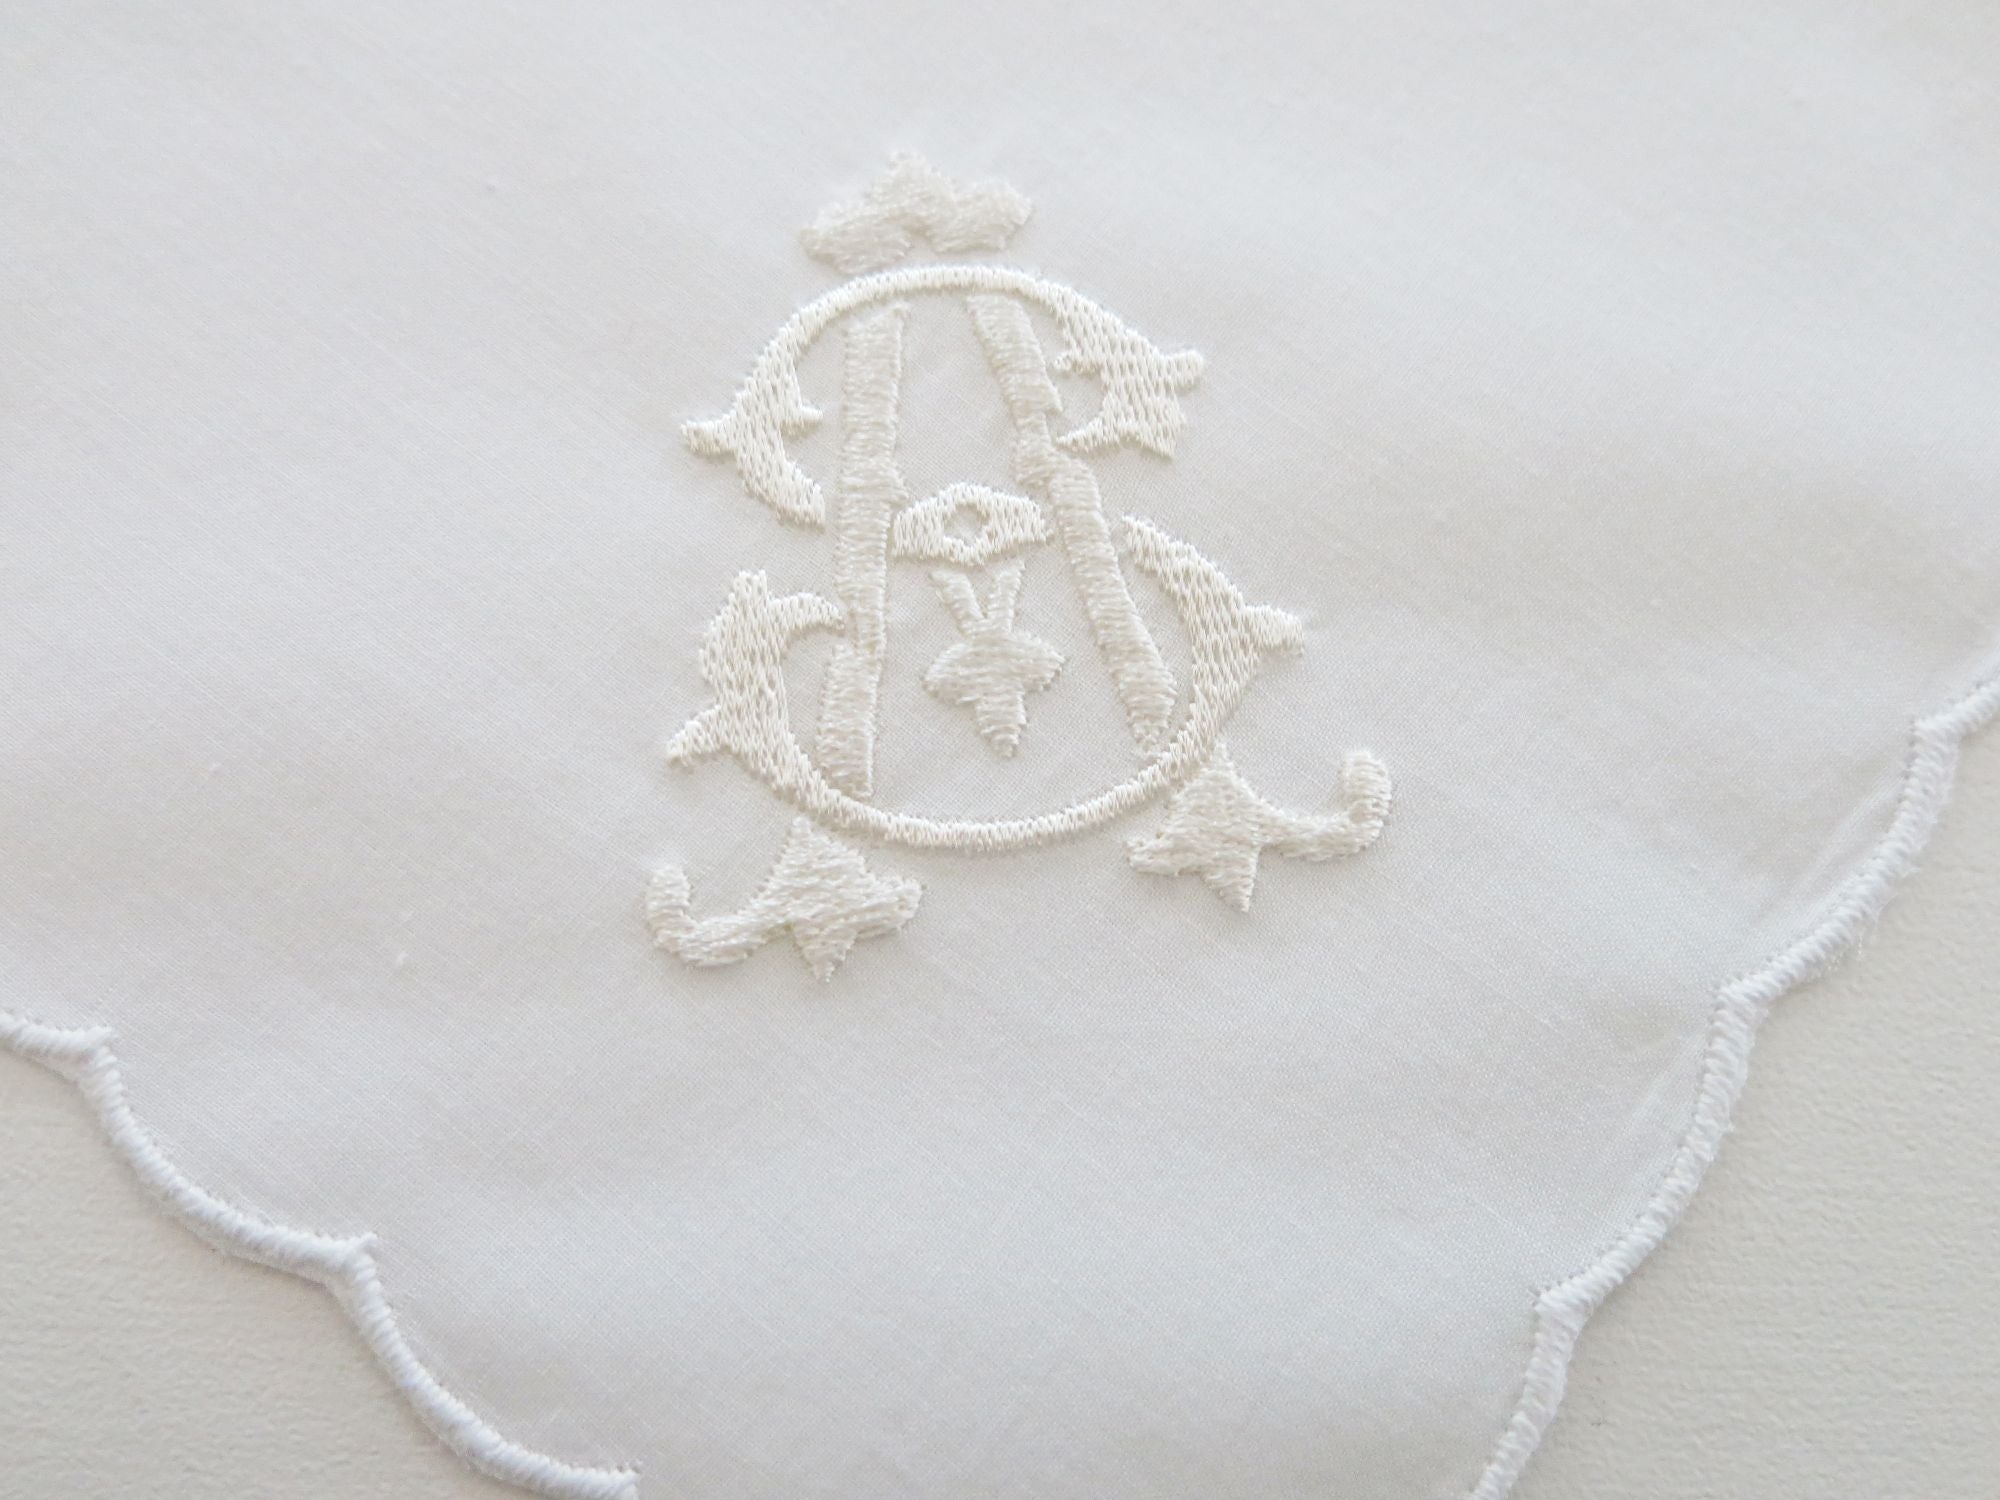 Ladies Cotton Handkerchief with Modern Chic 2 Intertwined Initials